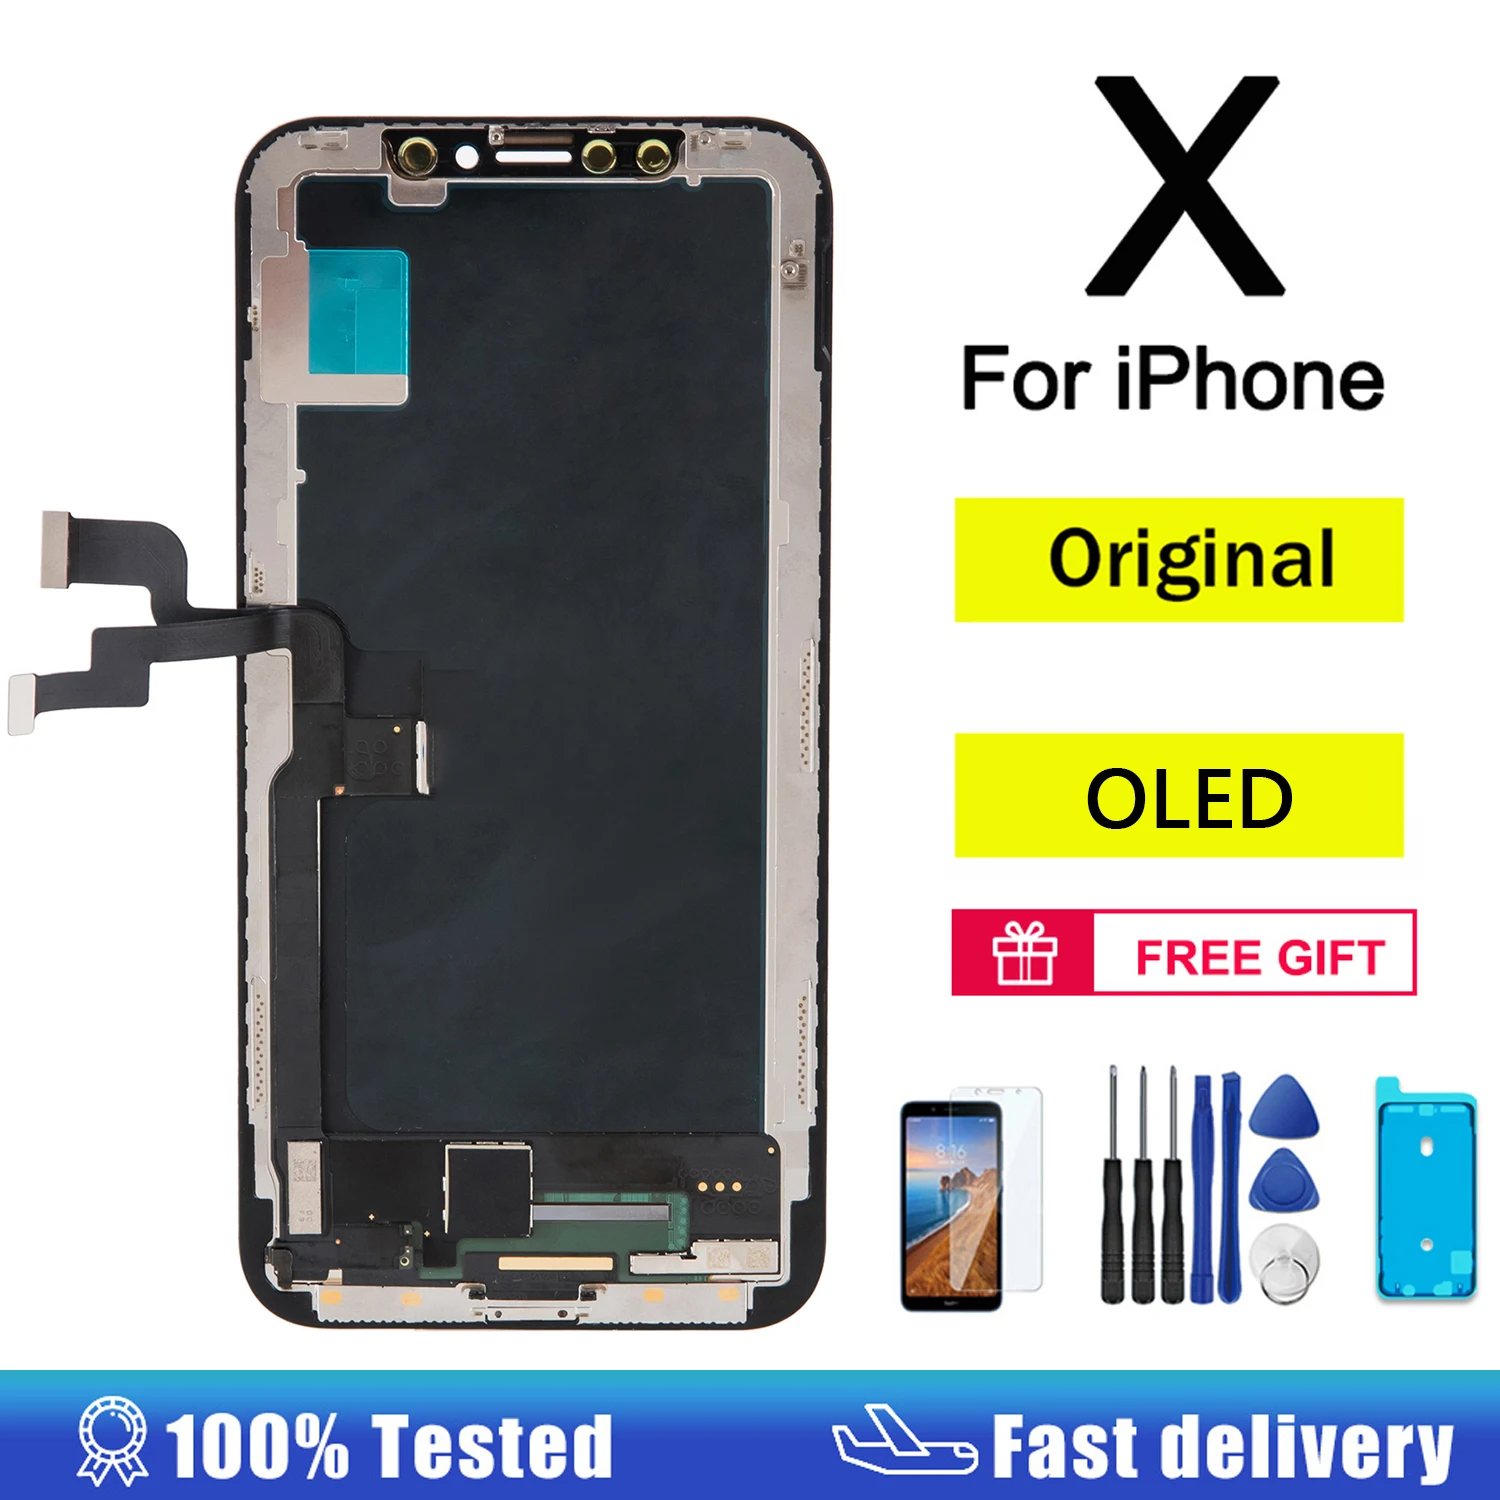 Enlarge Original OLED Display for IPhone X LCD Screen with Touch Assembly True Tone Replacement for IPhone XR XS Max 11 Pro Max Display